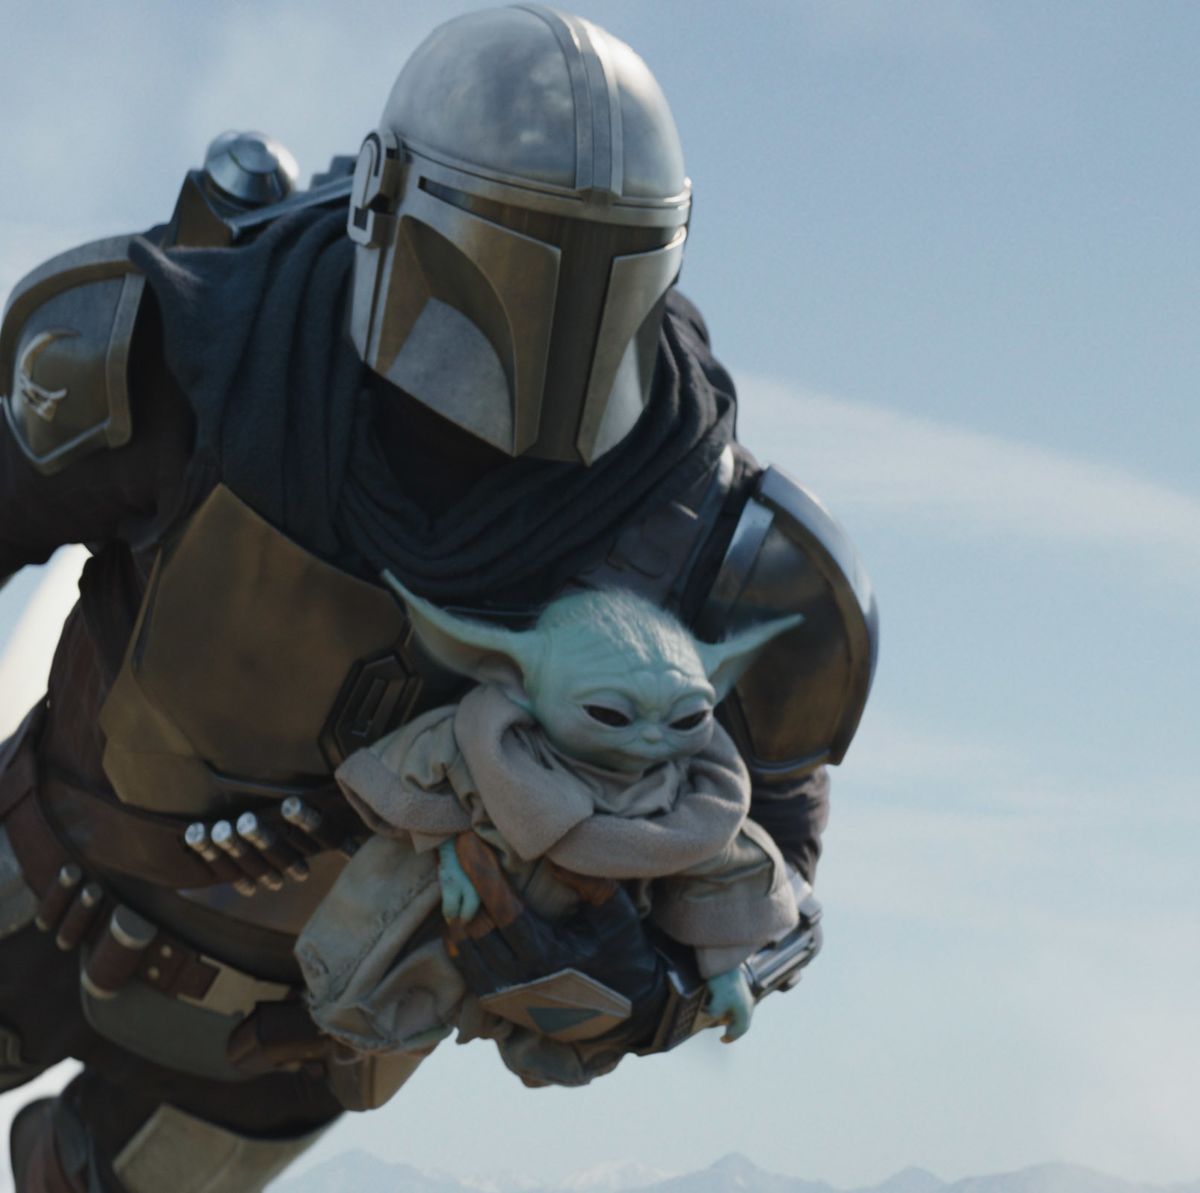 The Mandalorian's tragic Baby Yoda moment could have been avoided